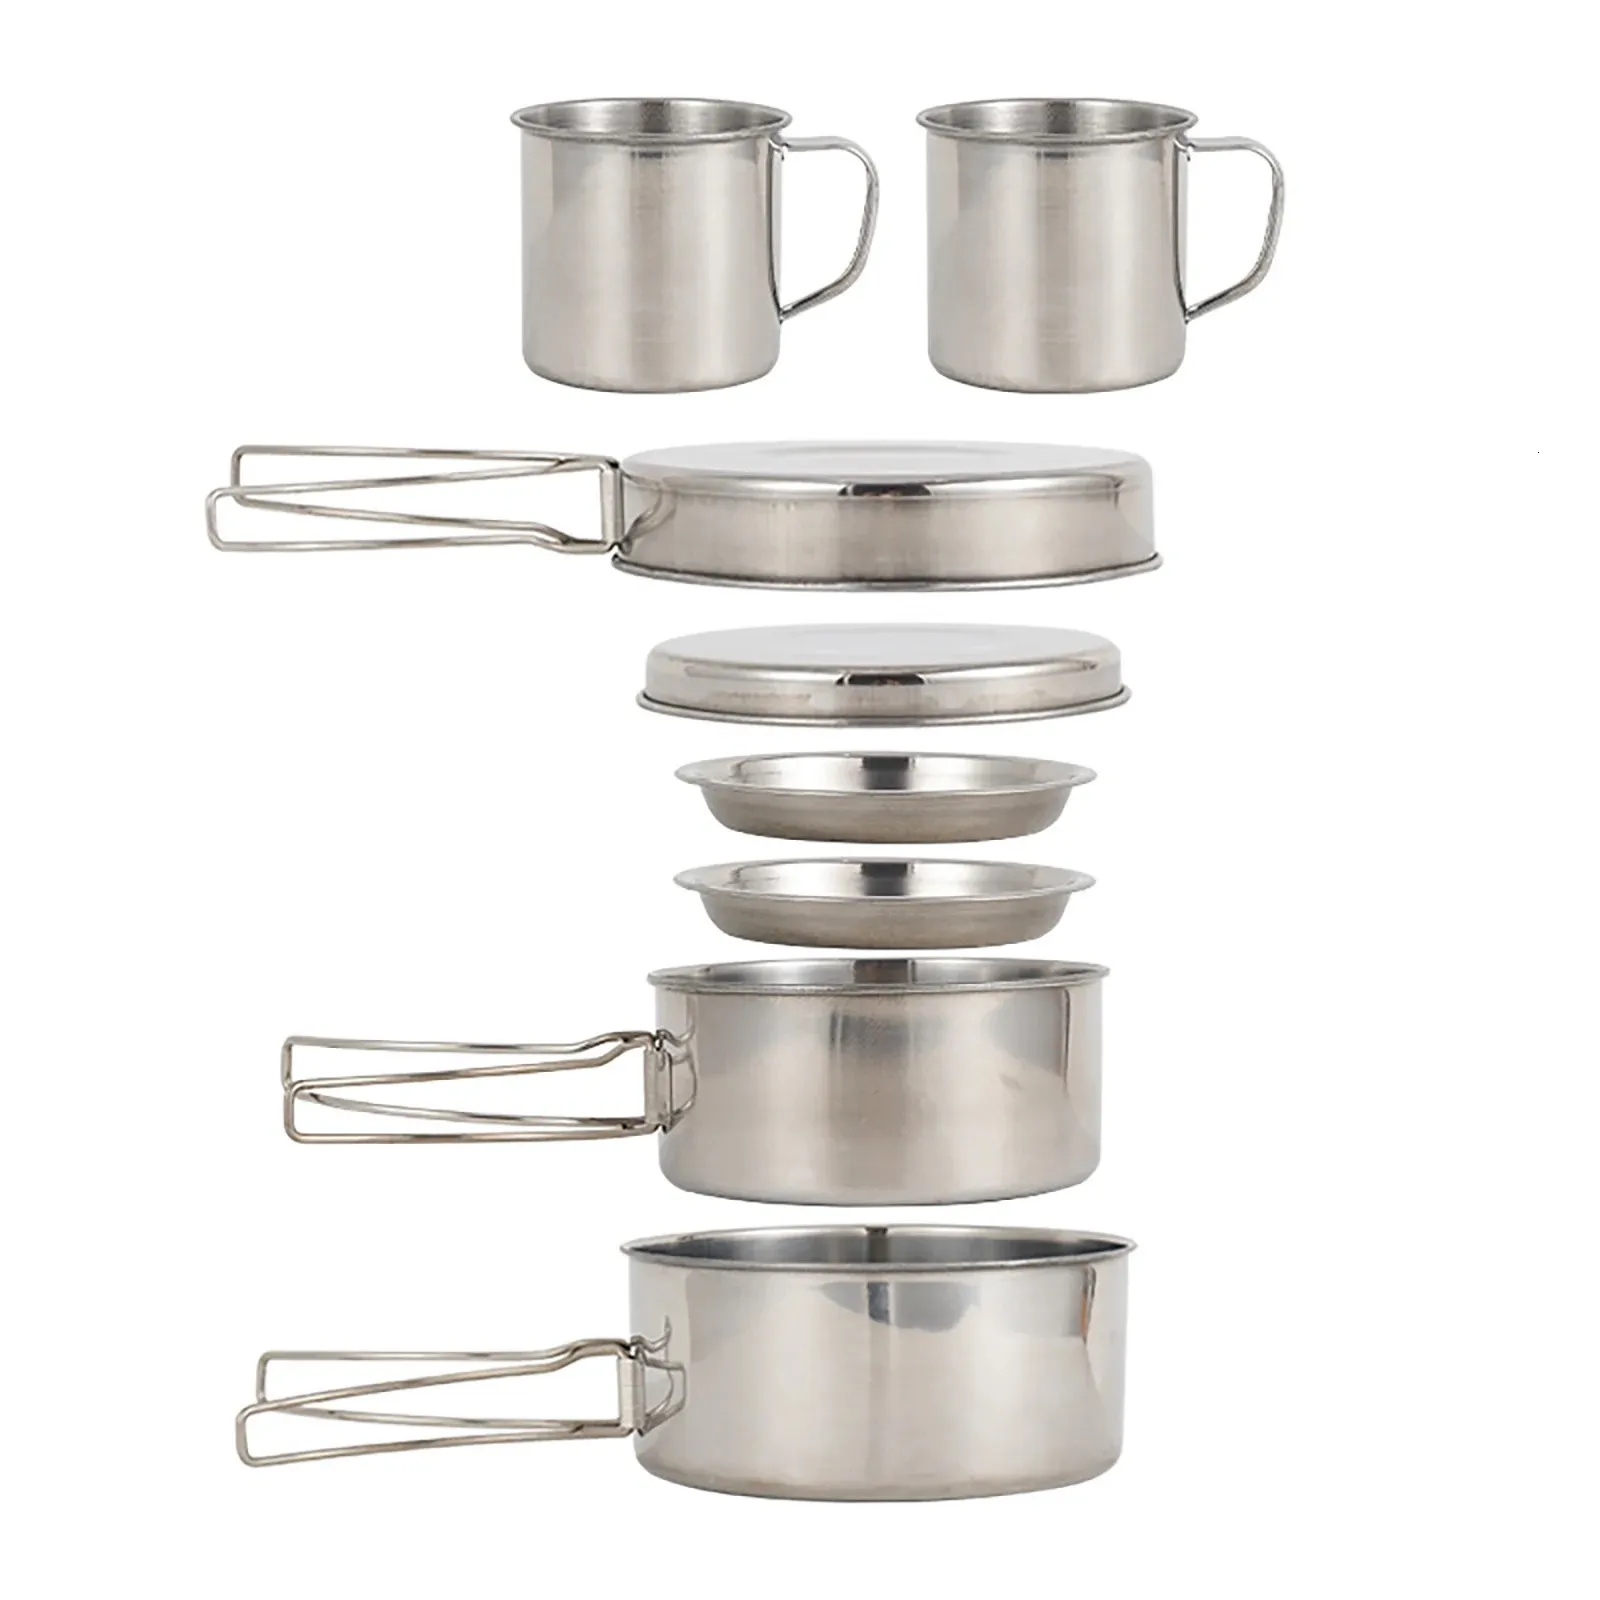 8PCS Camping Cookware Kit Portable Lightweight Stainless Steel Cooking Pot Pan Set with Plates Cups for Outdoor Picnic Hiking 240117